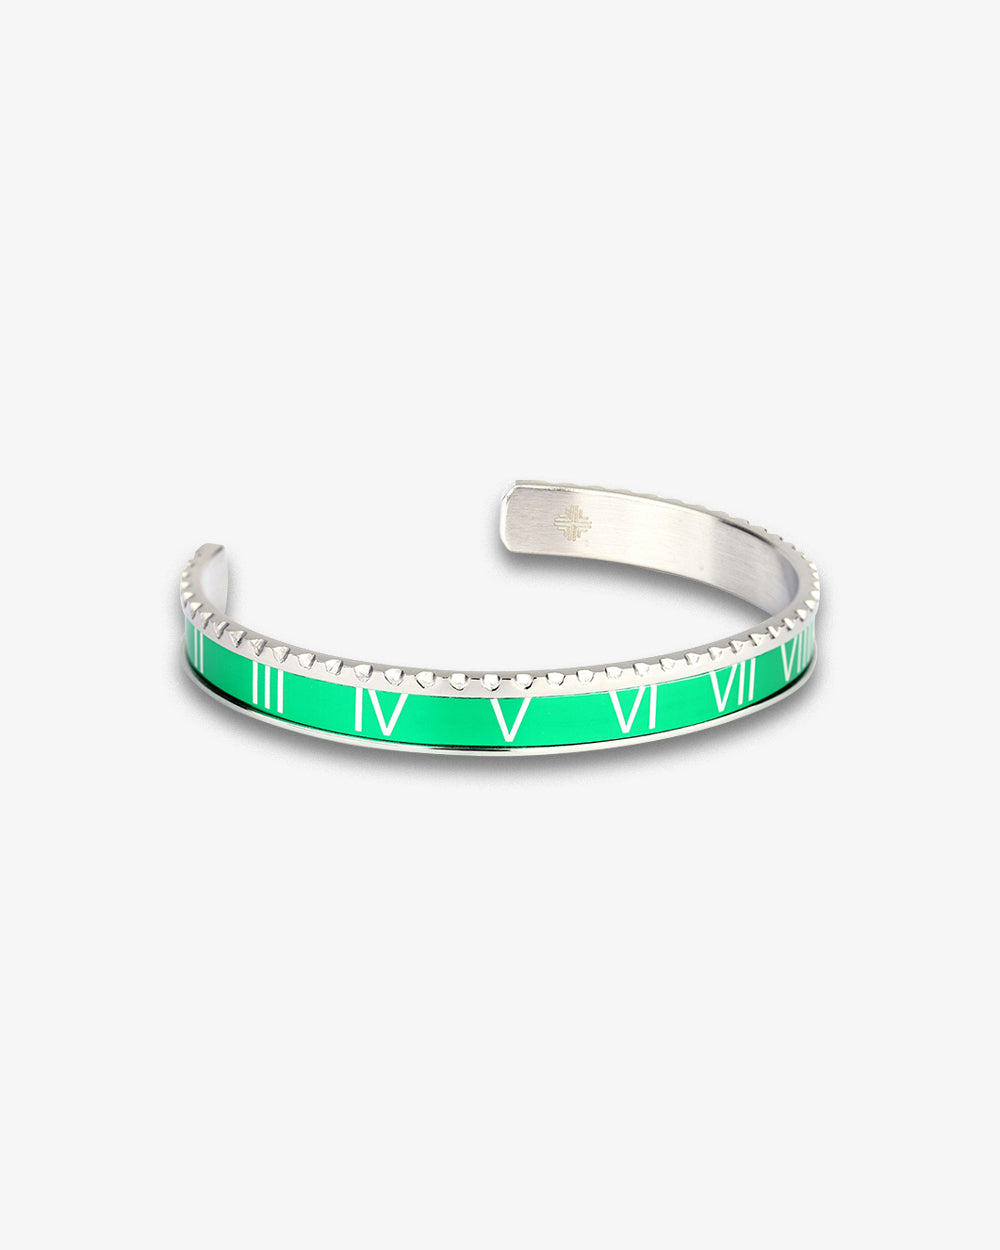 Swiss Concept Classic Roman Numeral Speed Bracelet (Green & Stainless Steel) - Polished Finish